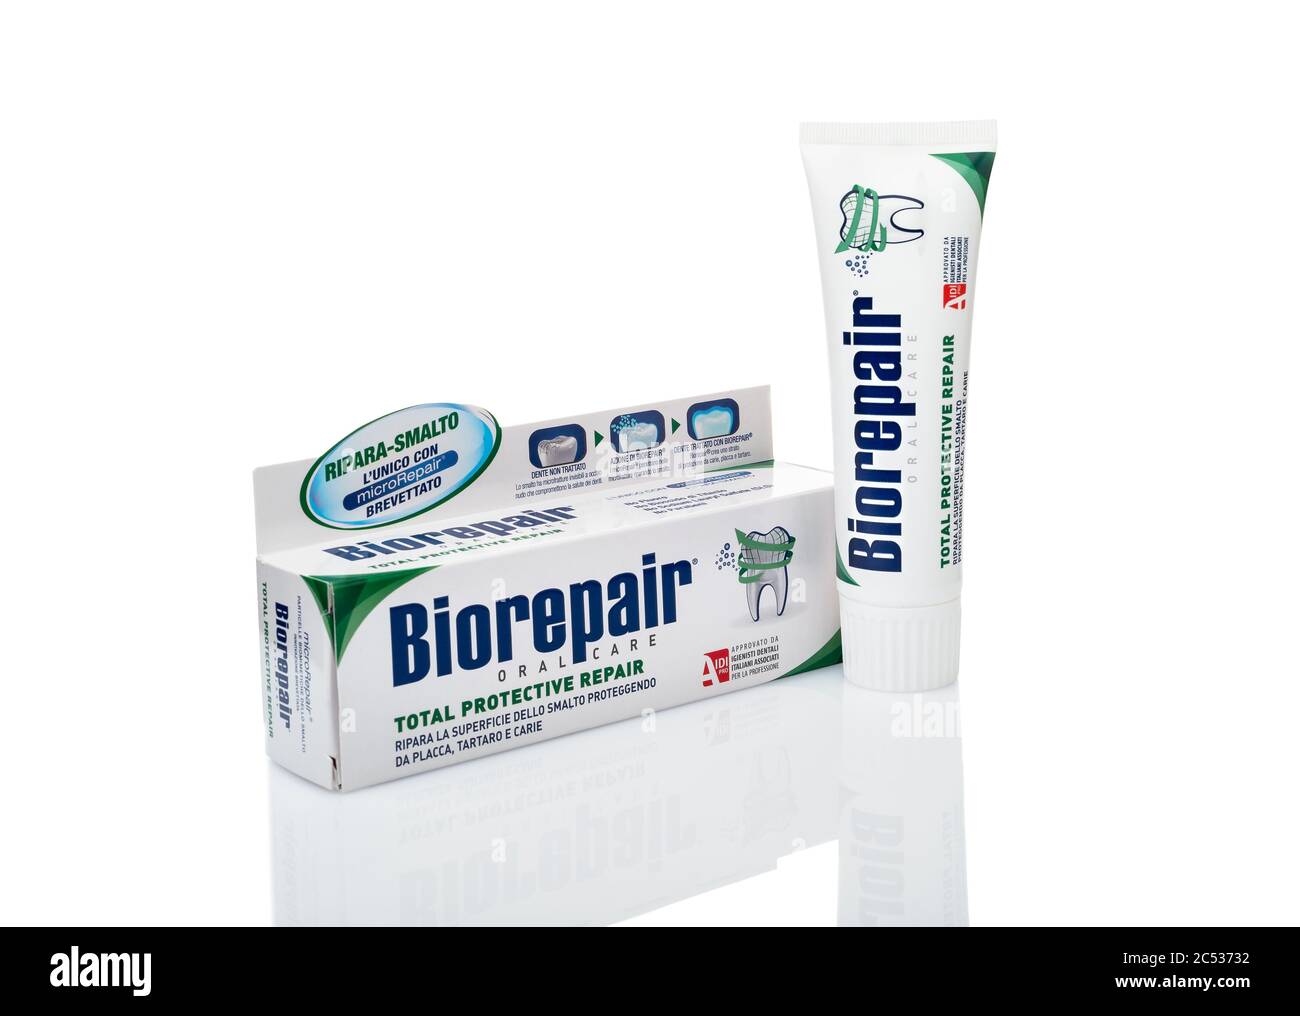 Varese, Italy - June 13, 2020: Biorepair - total protective repair,  toothpaste tube with box isolated on white background. Oral Care product  Stock Photo - Alamy